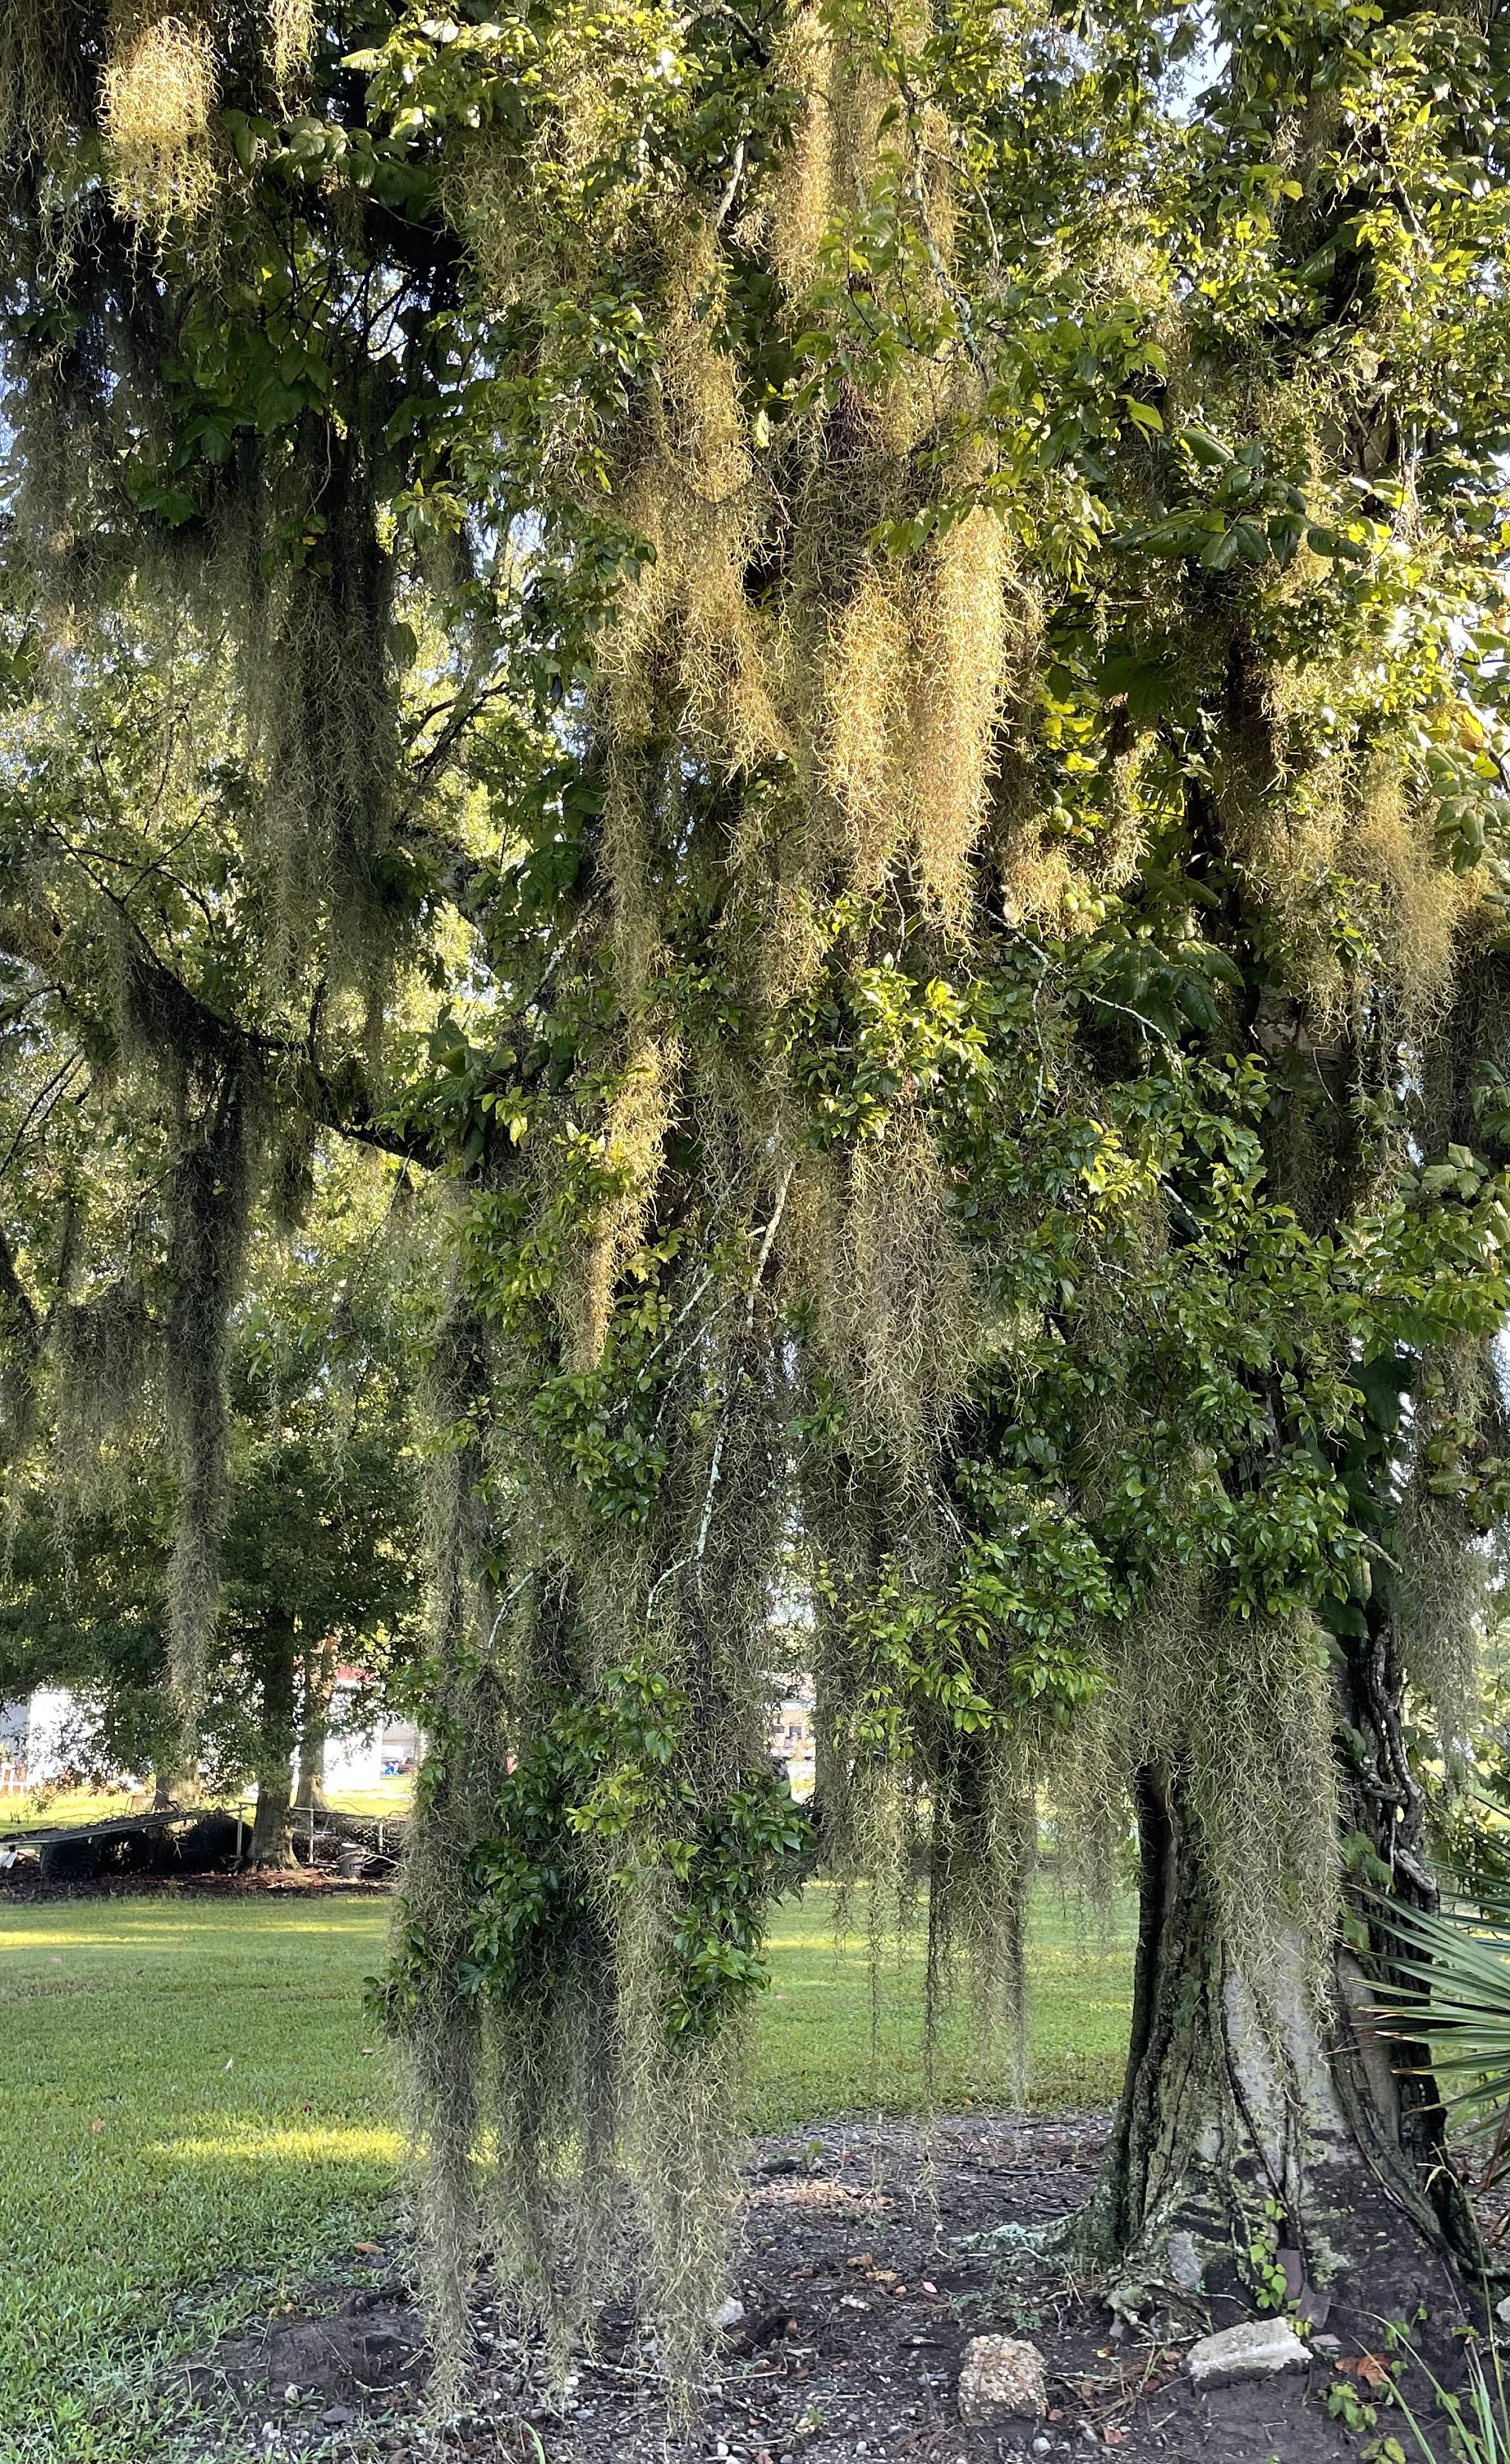 Premium Natural Spanish Moss | Natural Preserved - Great Ground Cover -  Filler for Potted Plants - by GARDENERA - 1 Quart Bag